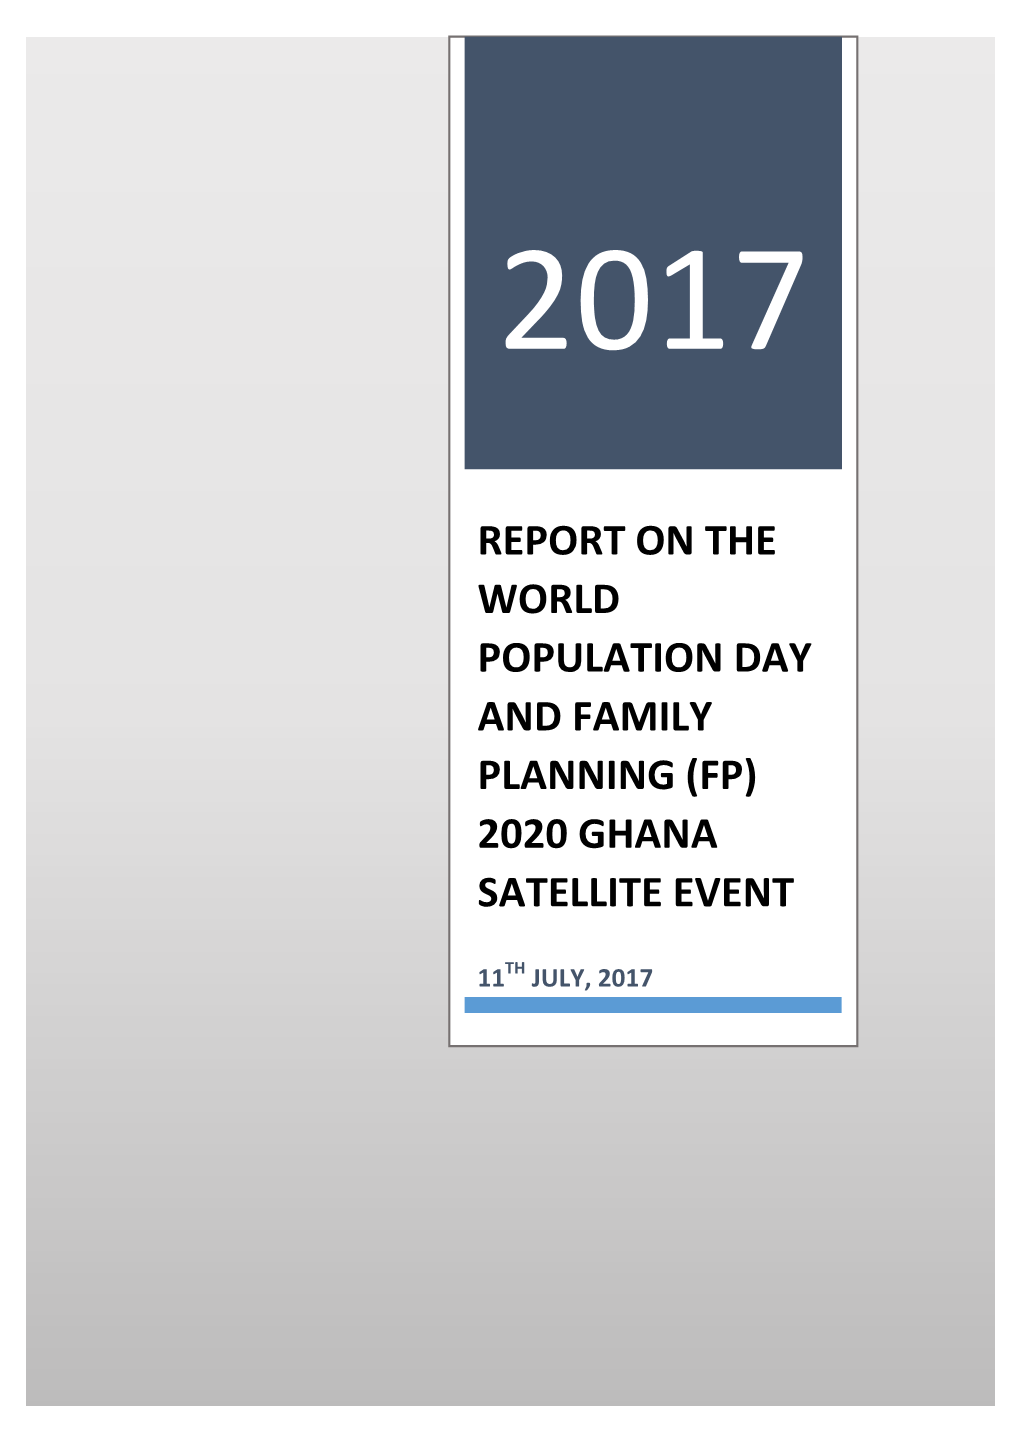 Report on the World Population Day and Family Planning (Fp) 2020 Ghana Satellite Event